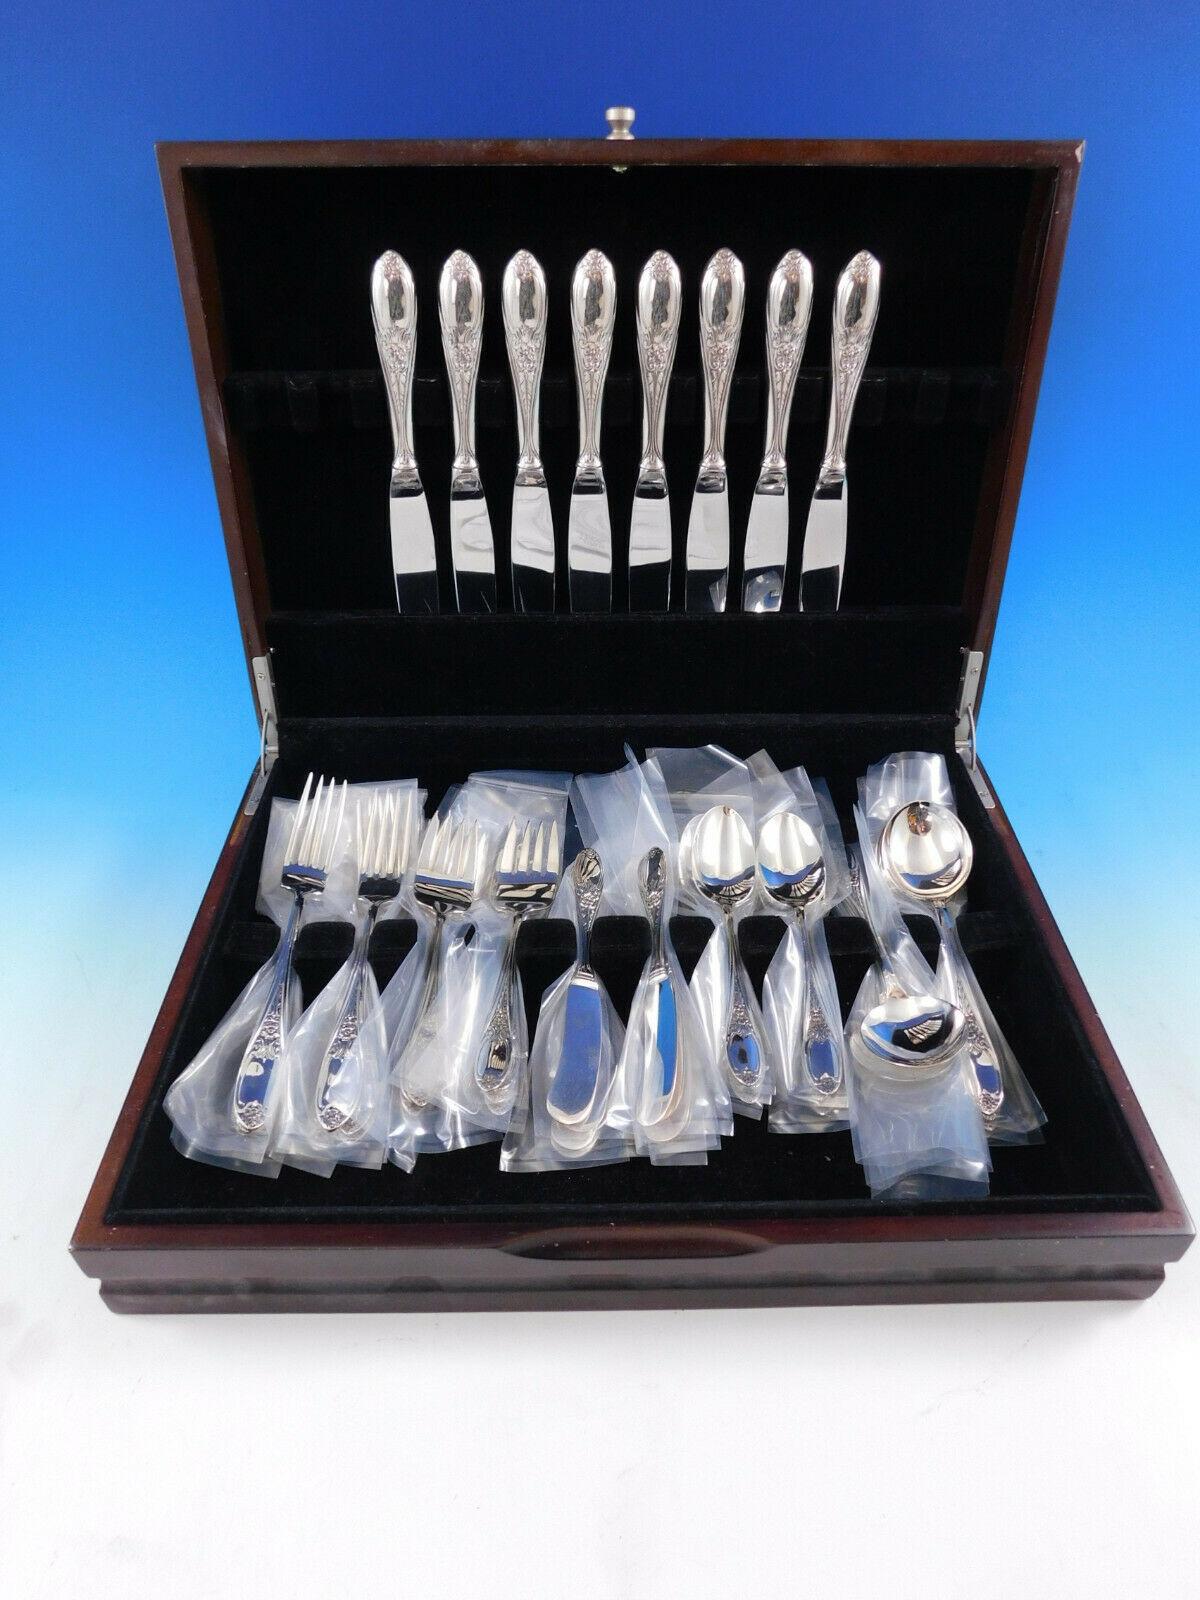 Colonial rose by Amston sterling silver flatware set - 48 pieces. This set includes:

8 knives, 8 3/4